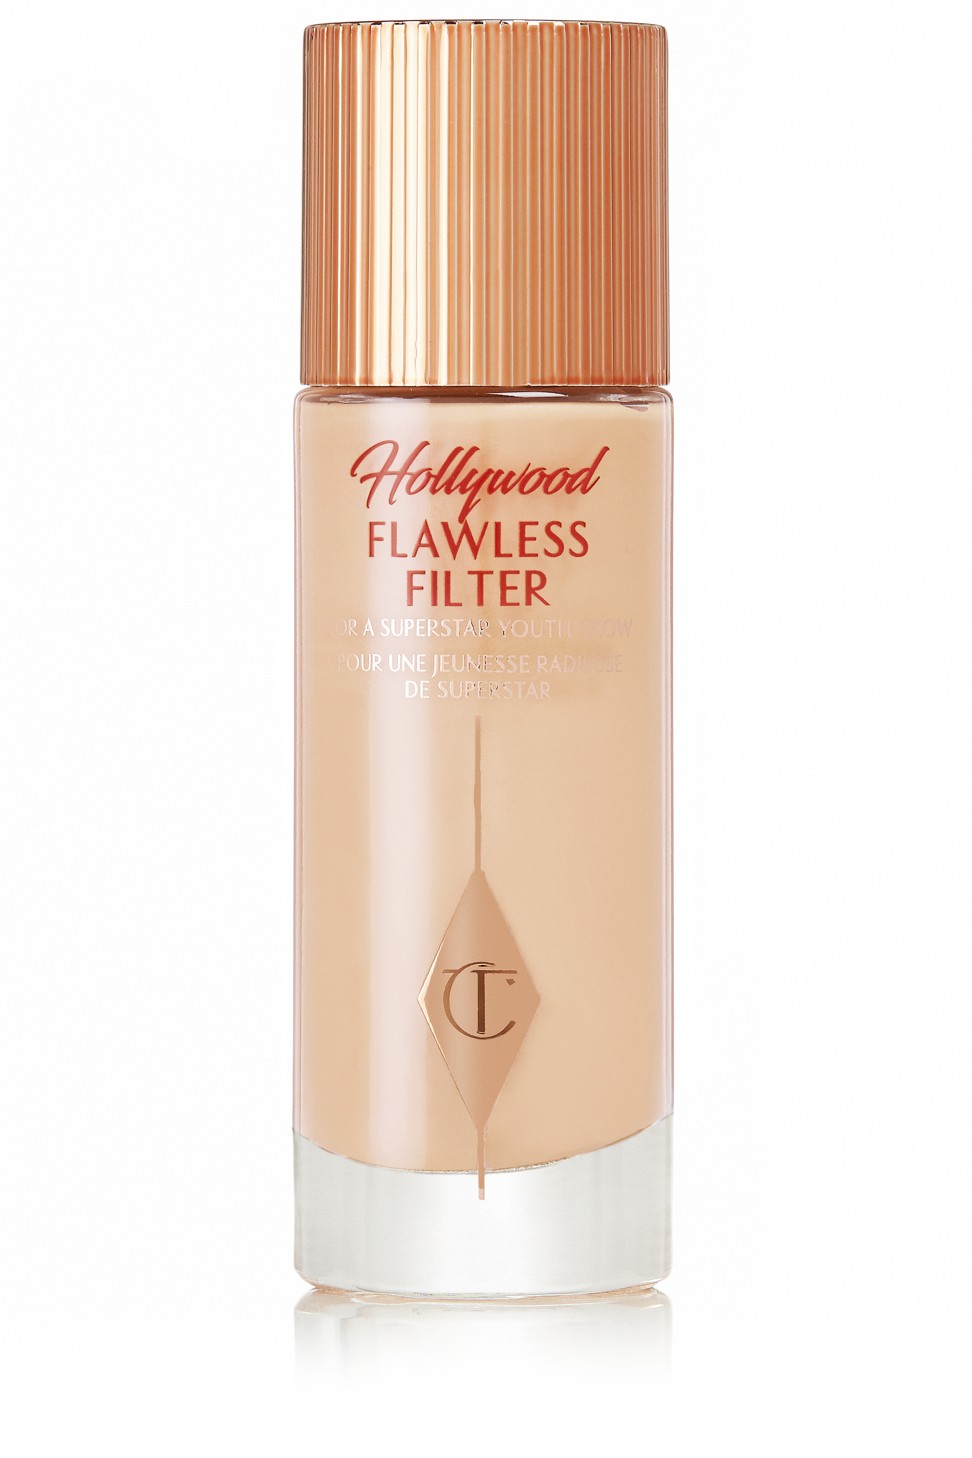 Charlotte Tilbury Hollywood Flawless Filter is a customisable complexion booster.